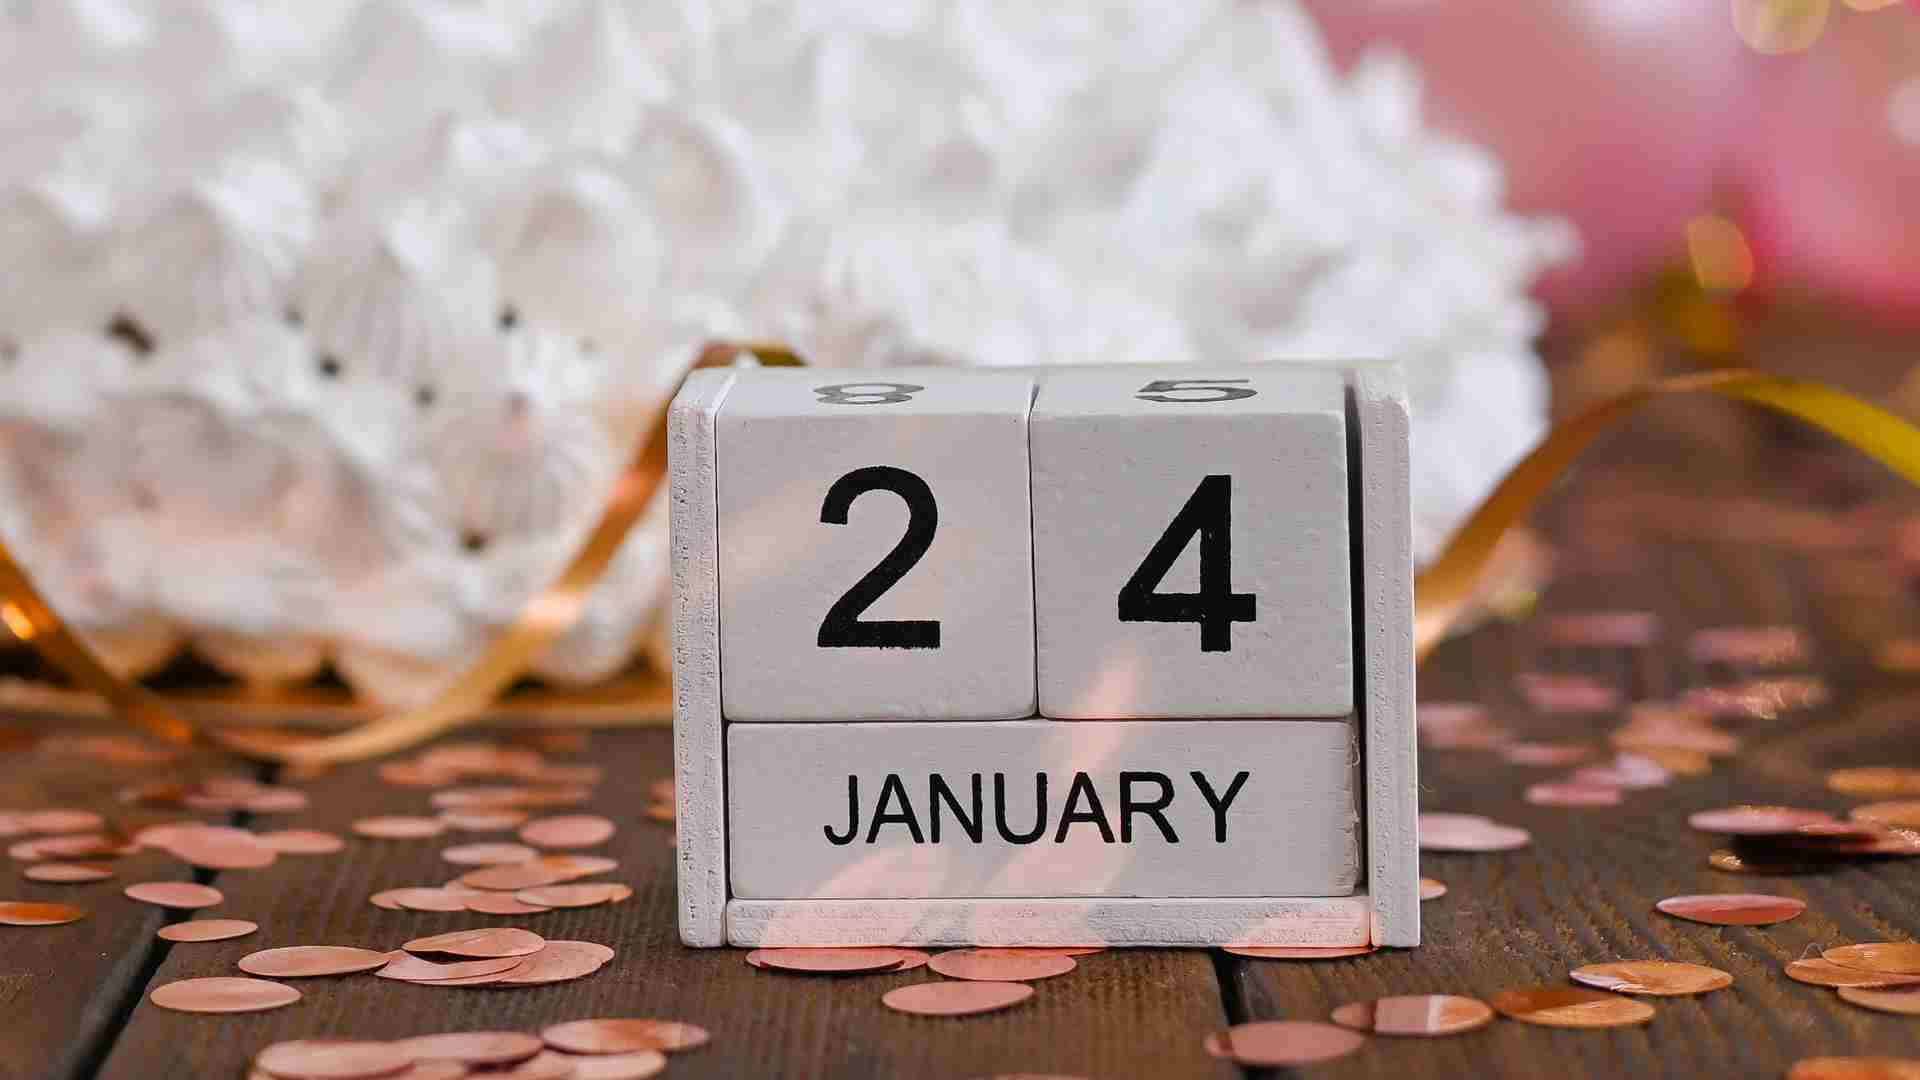 Some retirees are eligible for the January 24 payment if they meet the 2 requirements Social Security set